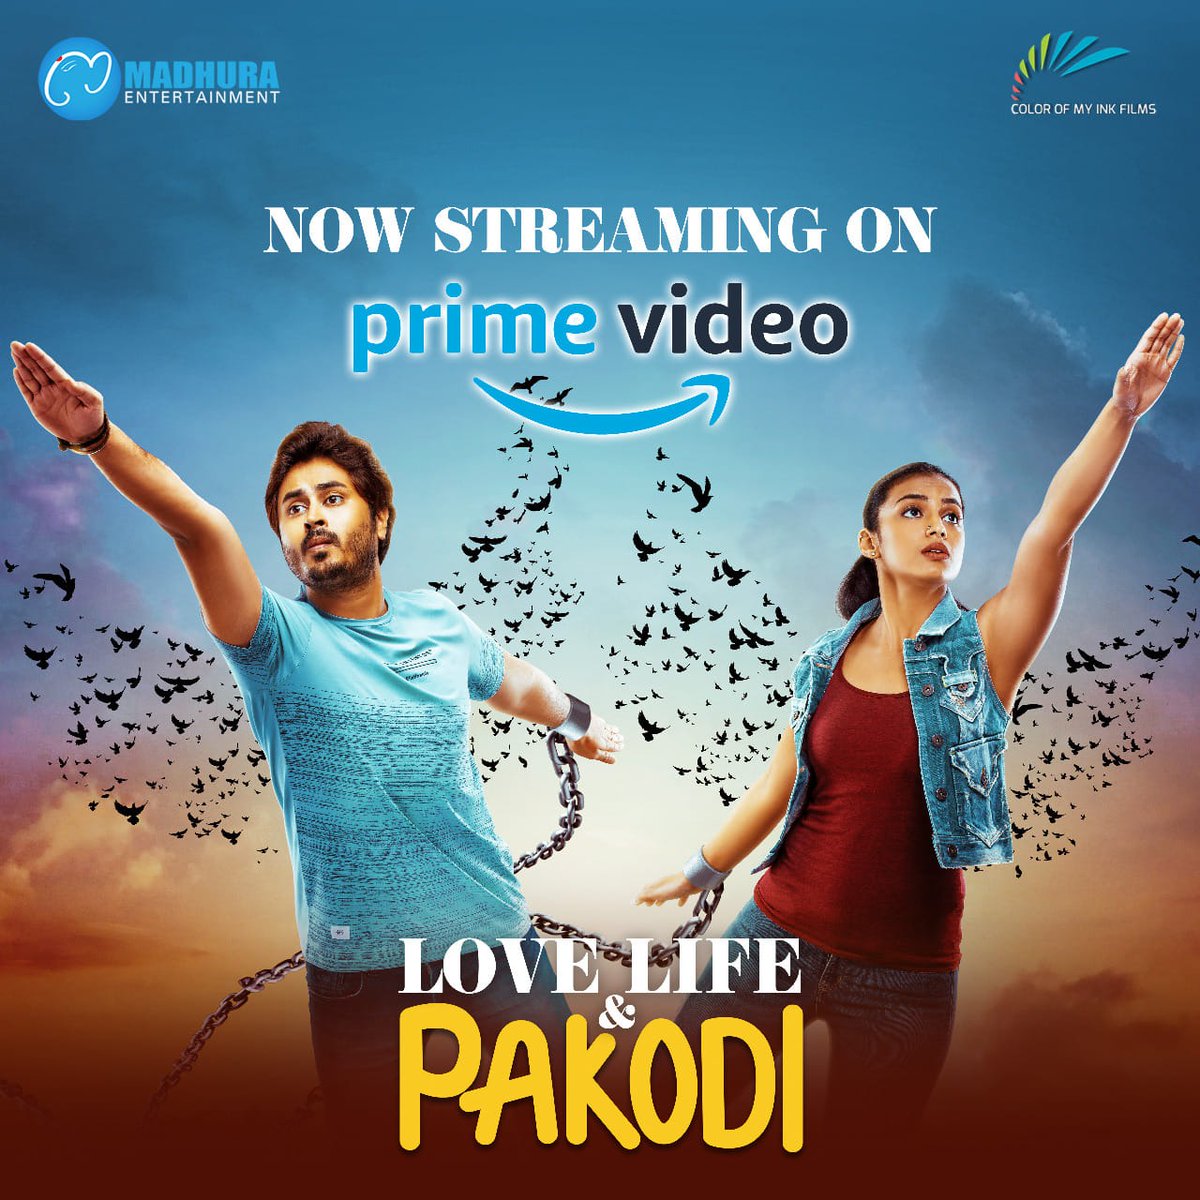 A Charming relatable film abt new age relationships subsequent questions around marriages. • @filmijay successfully addresses all the points he wants to. • watch out fr @PoonachaSancho as Rheya • @okmusician stands out • Movie lags a bit #lovelifeandpakodi @madhurasreedhar